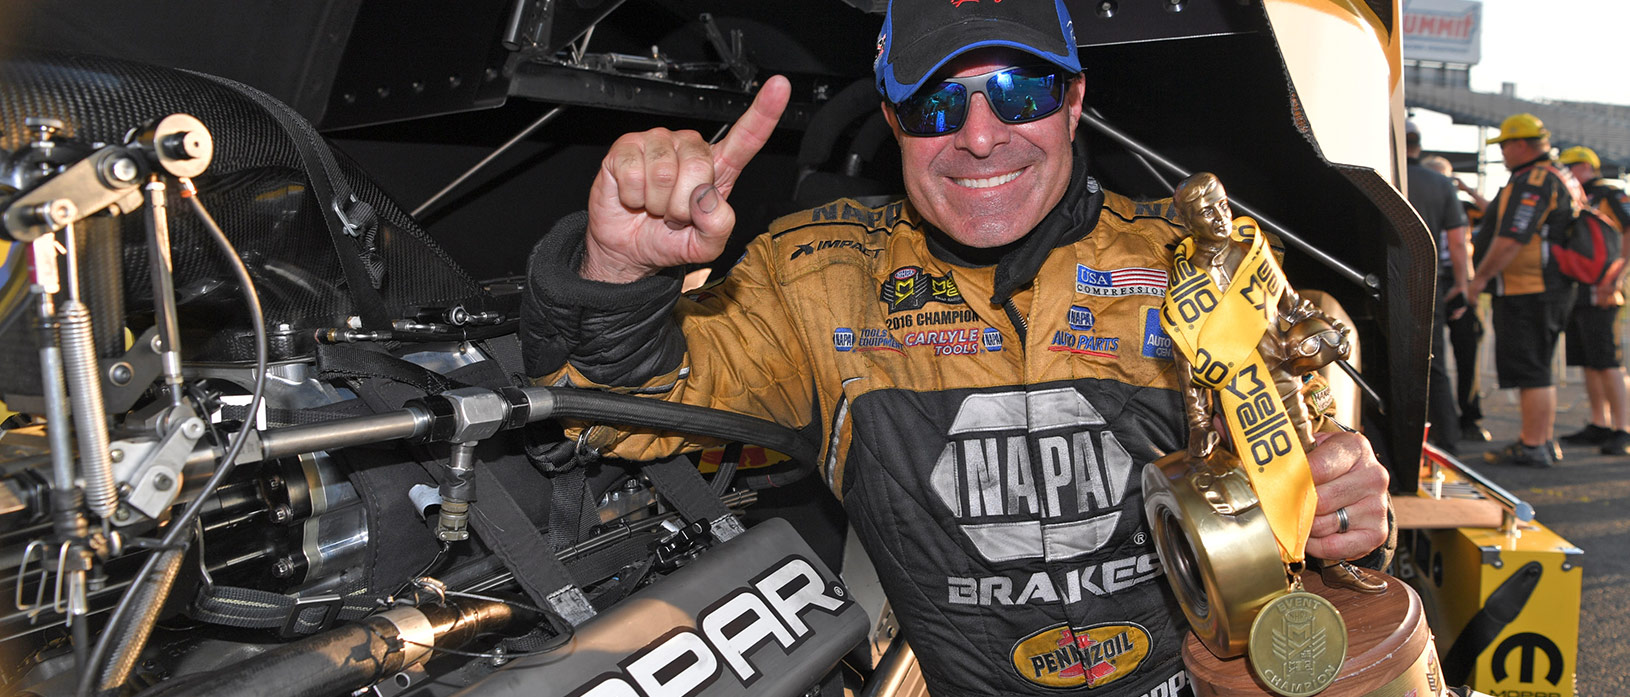 Ron Capps holding up his Wally trophy after winning the NHRA Virginia Nationals